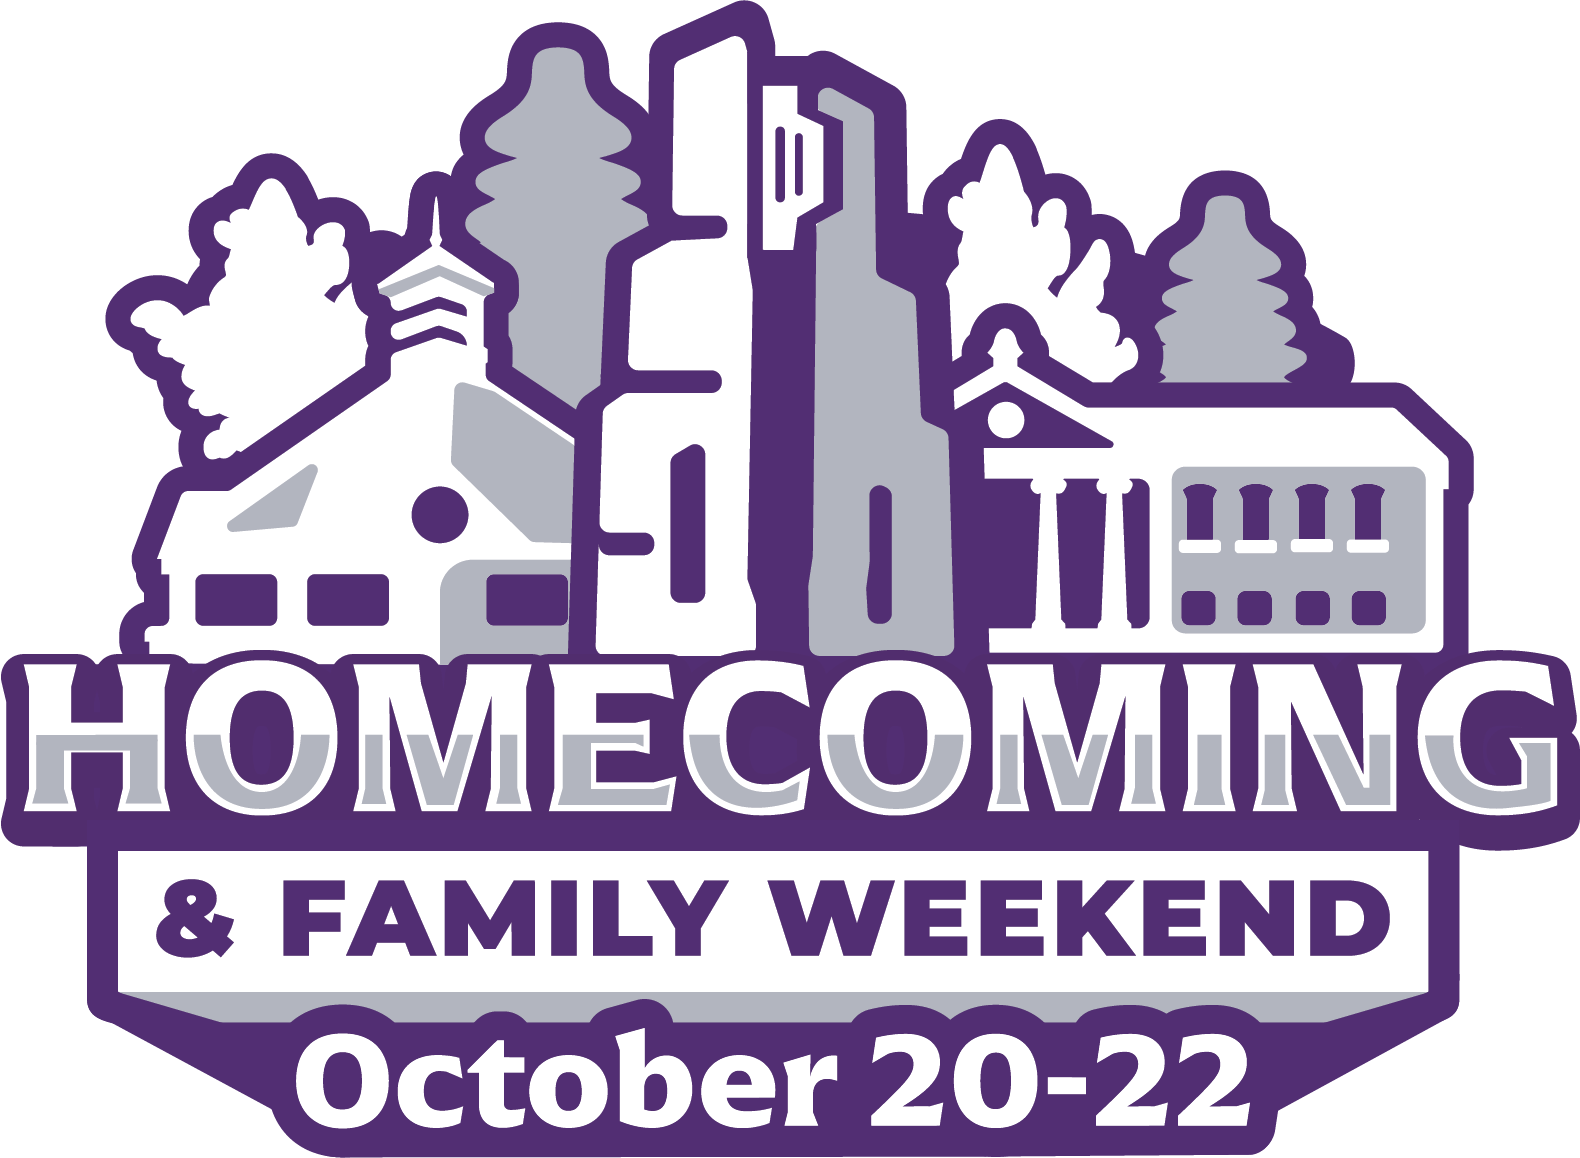 Homecoming and Family Weekend Logo